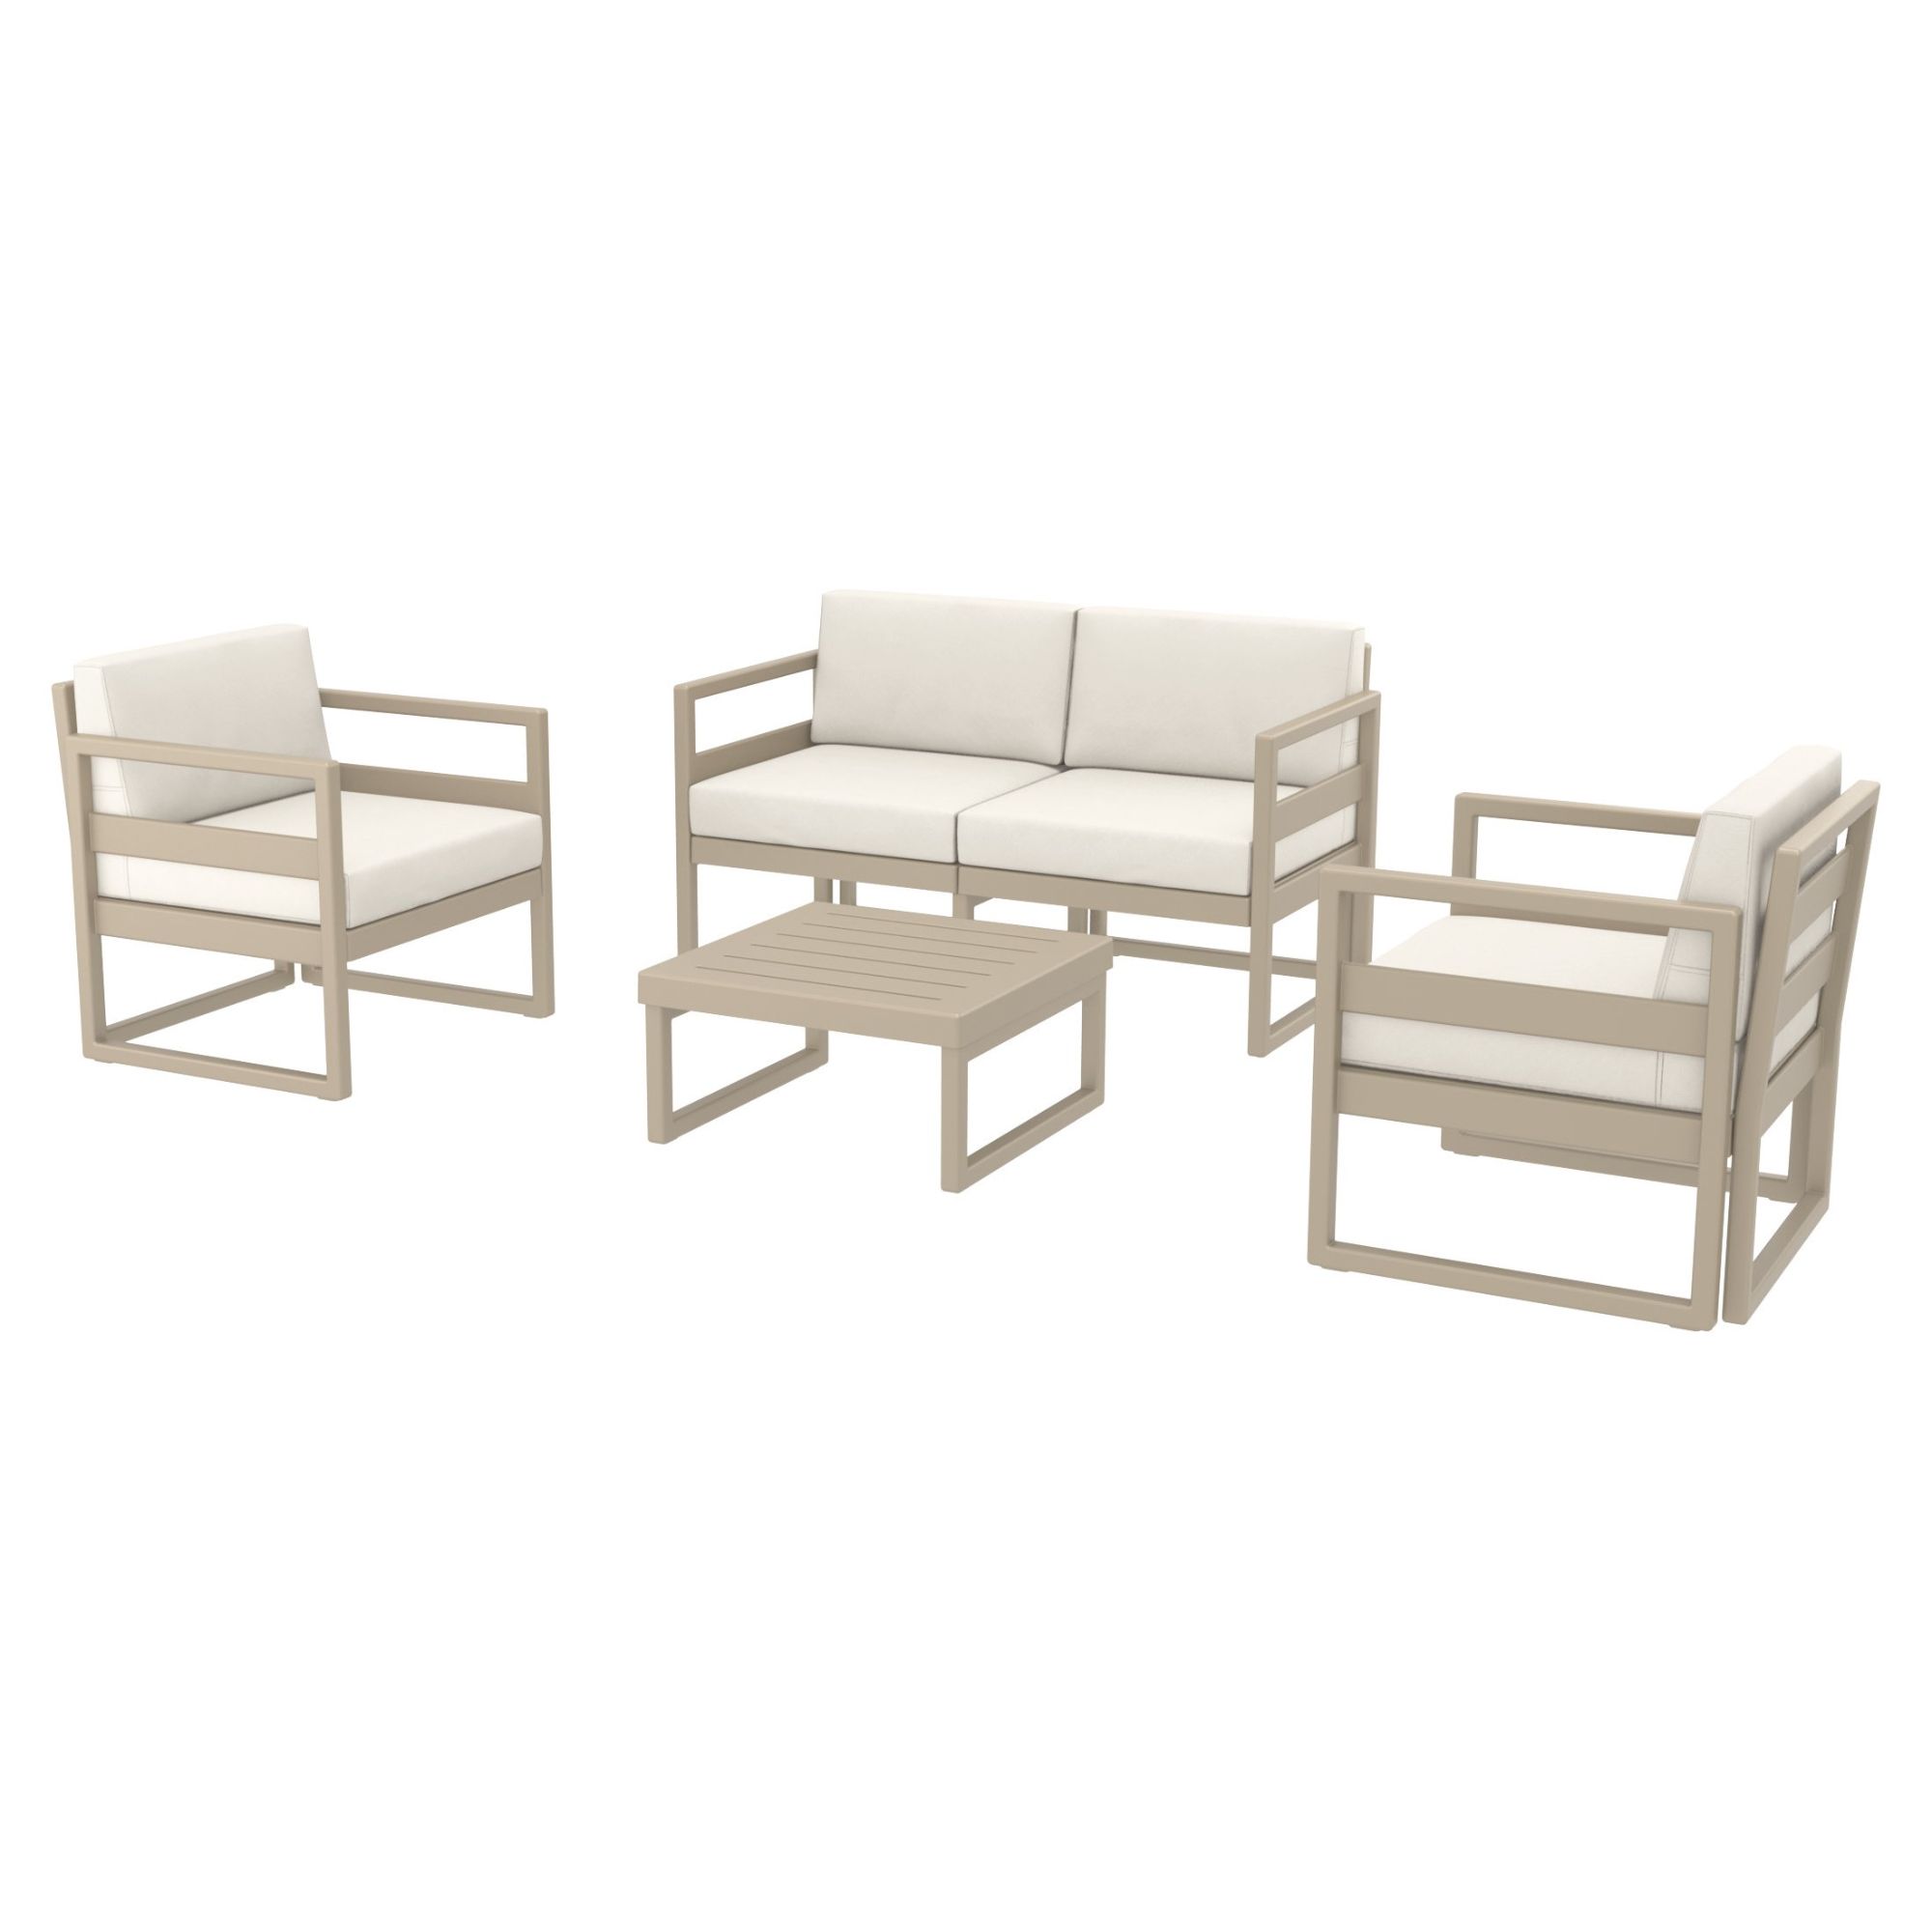 4 Piece Taupe Outdoor Patio Lounge Set with Natural Sunbrella Cushion 54.5" - image 1 of 3